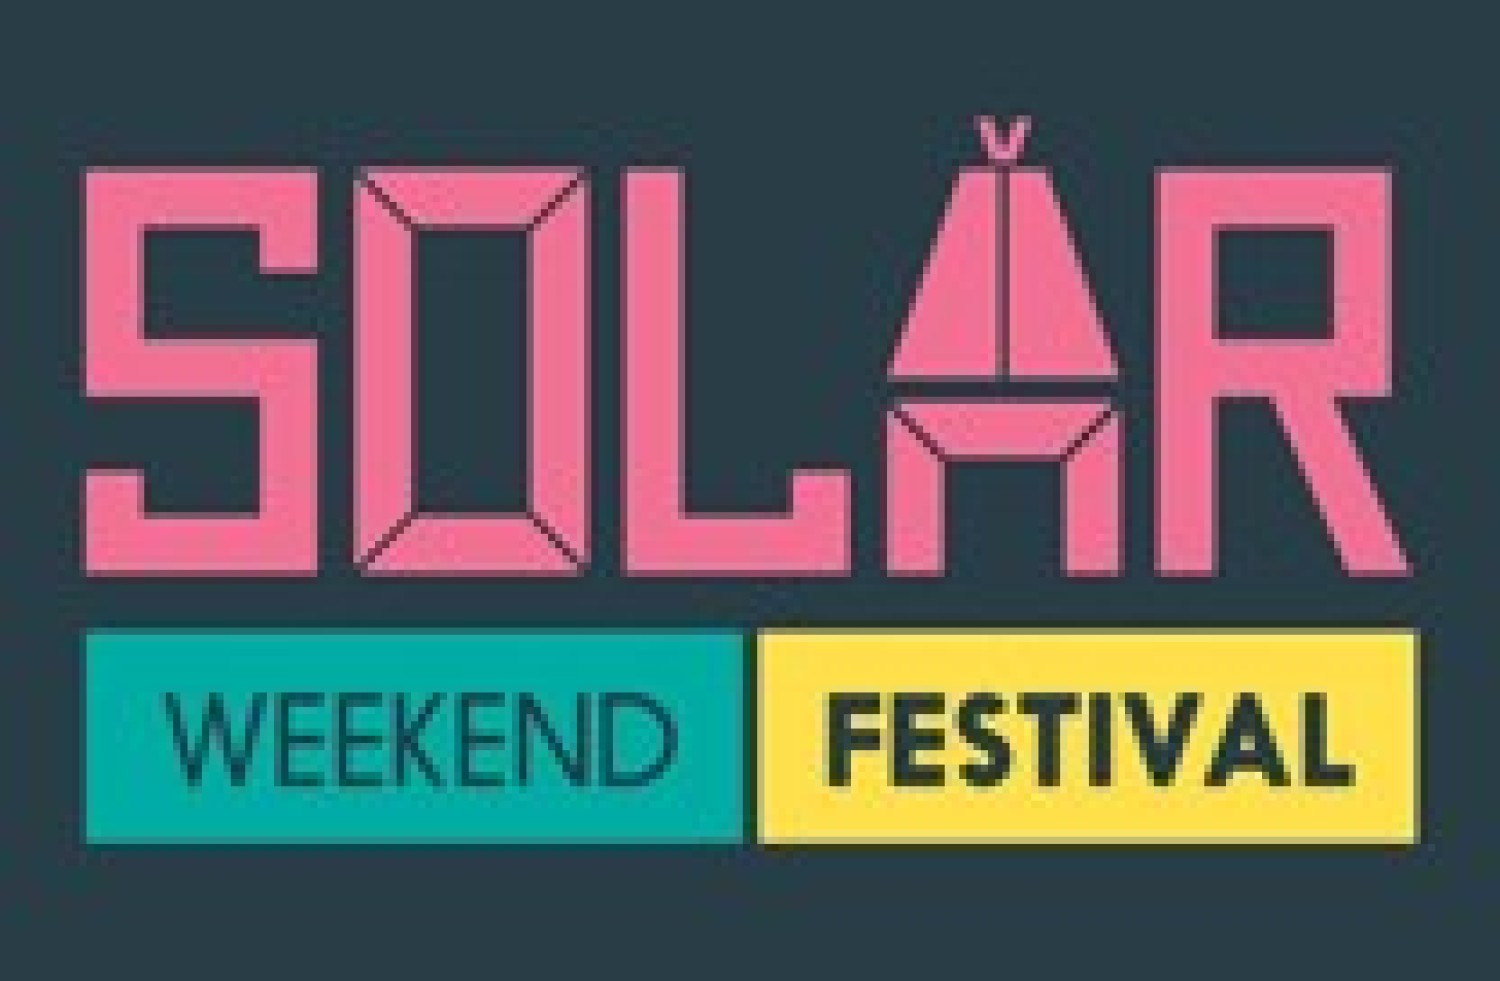 Party report: Solar weekend 2016, Roermond (07-08-2016)